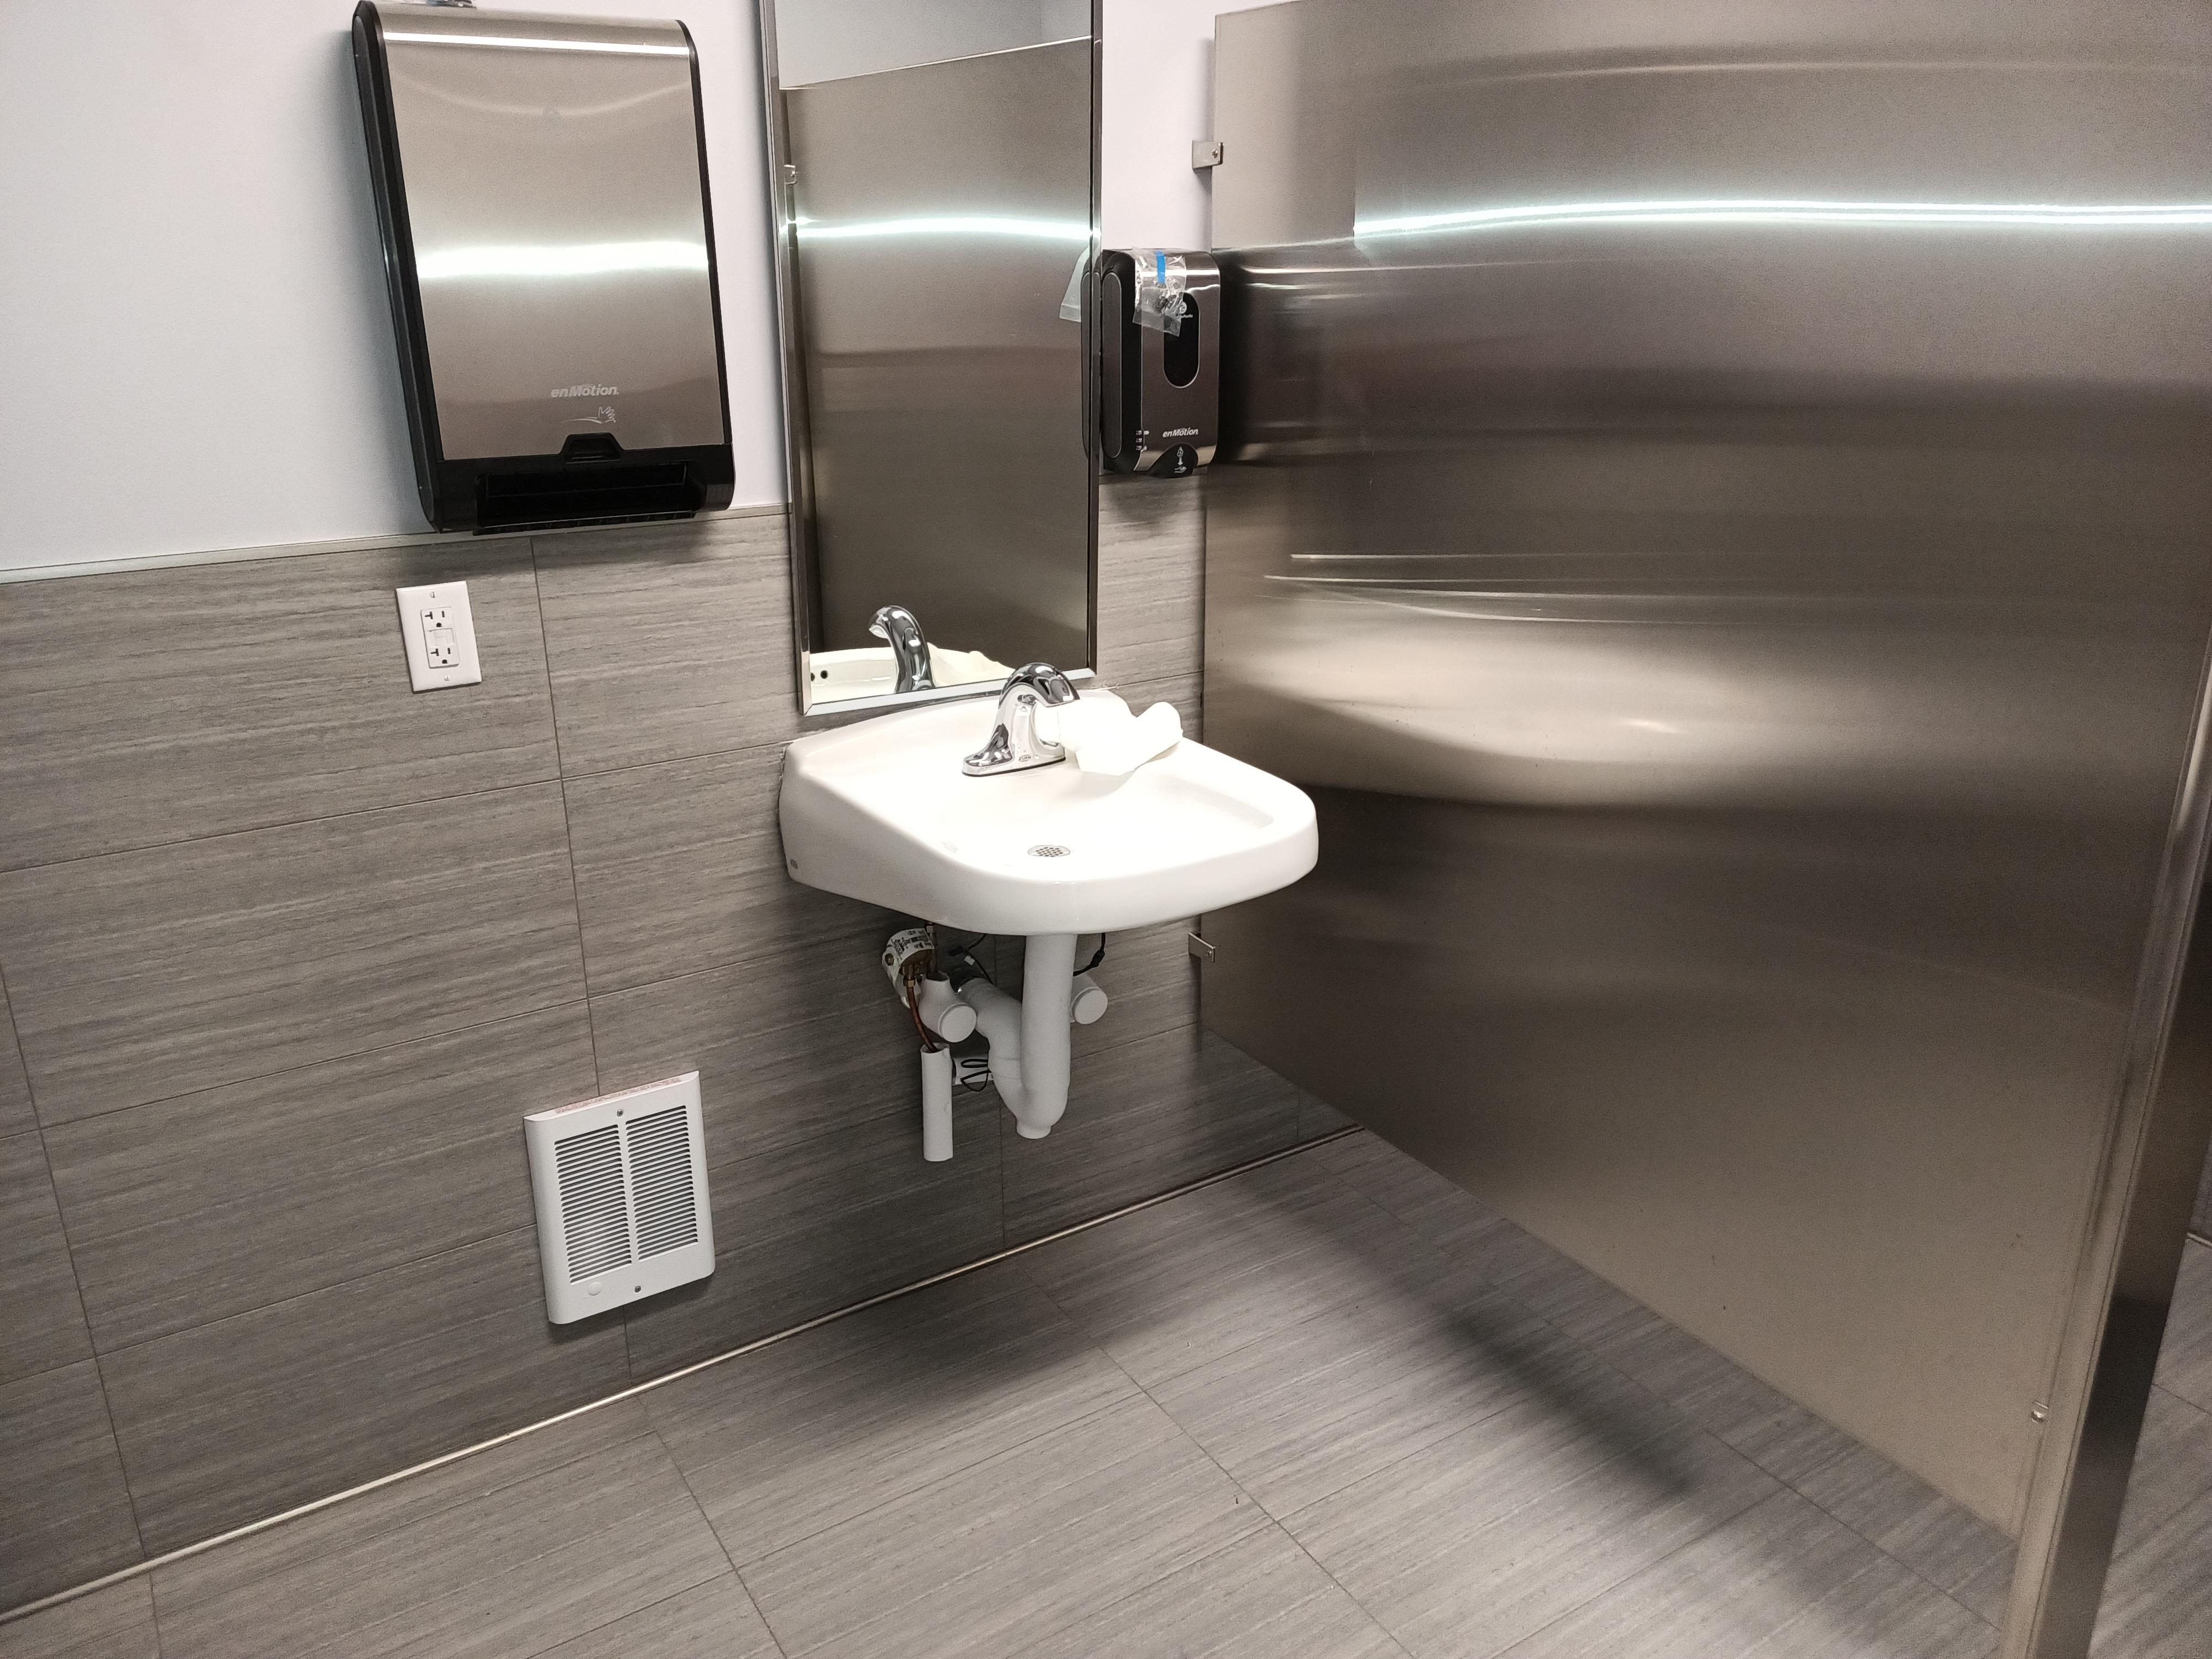 We handle full bathroom installs, weather it is commercial or home.